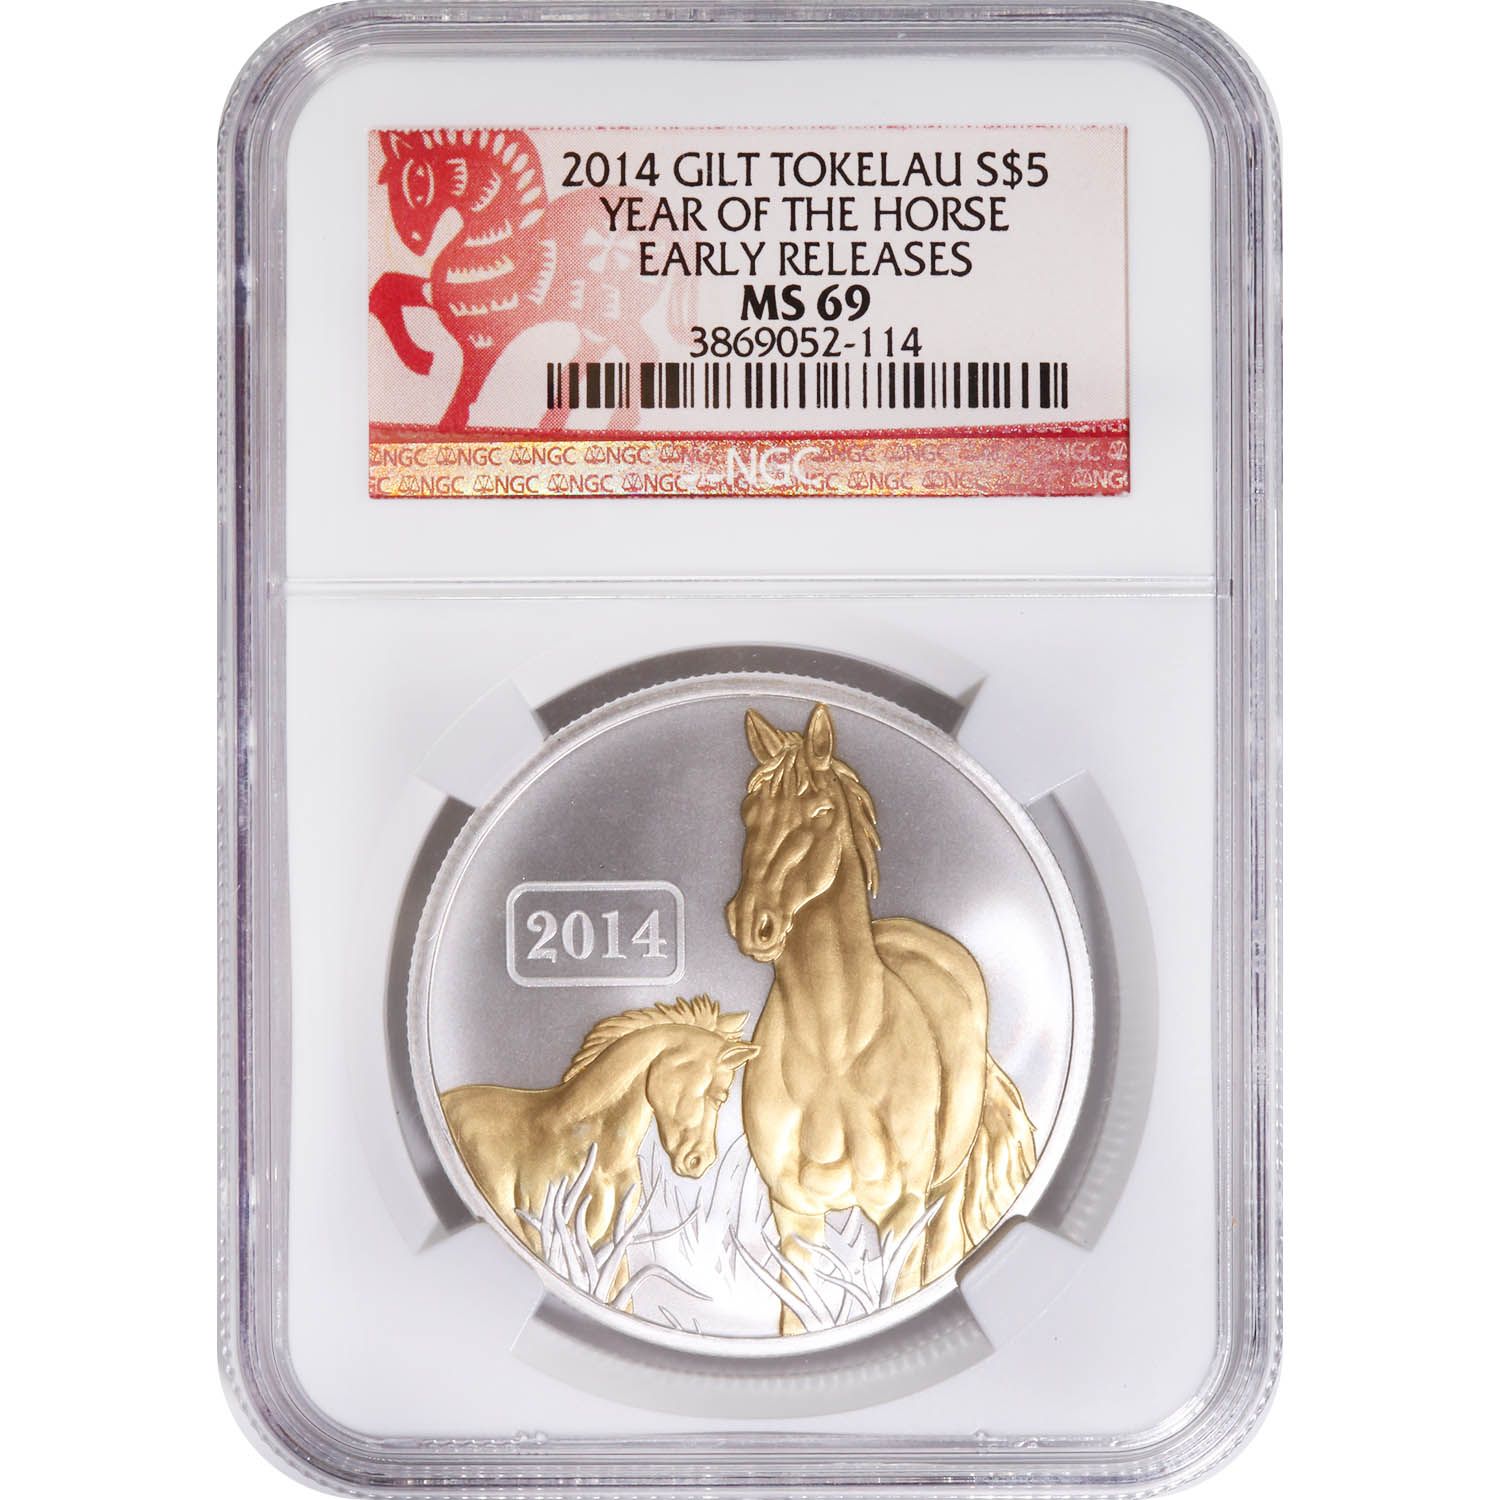 Tokelau $5 Gilded Silver 1 Oz. 2014 Year of the Horse MS69 NGC